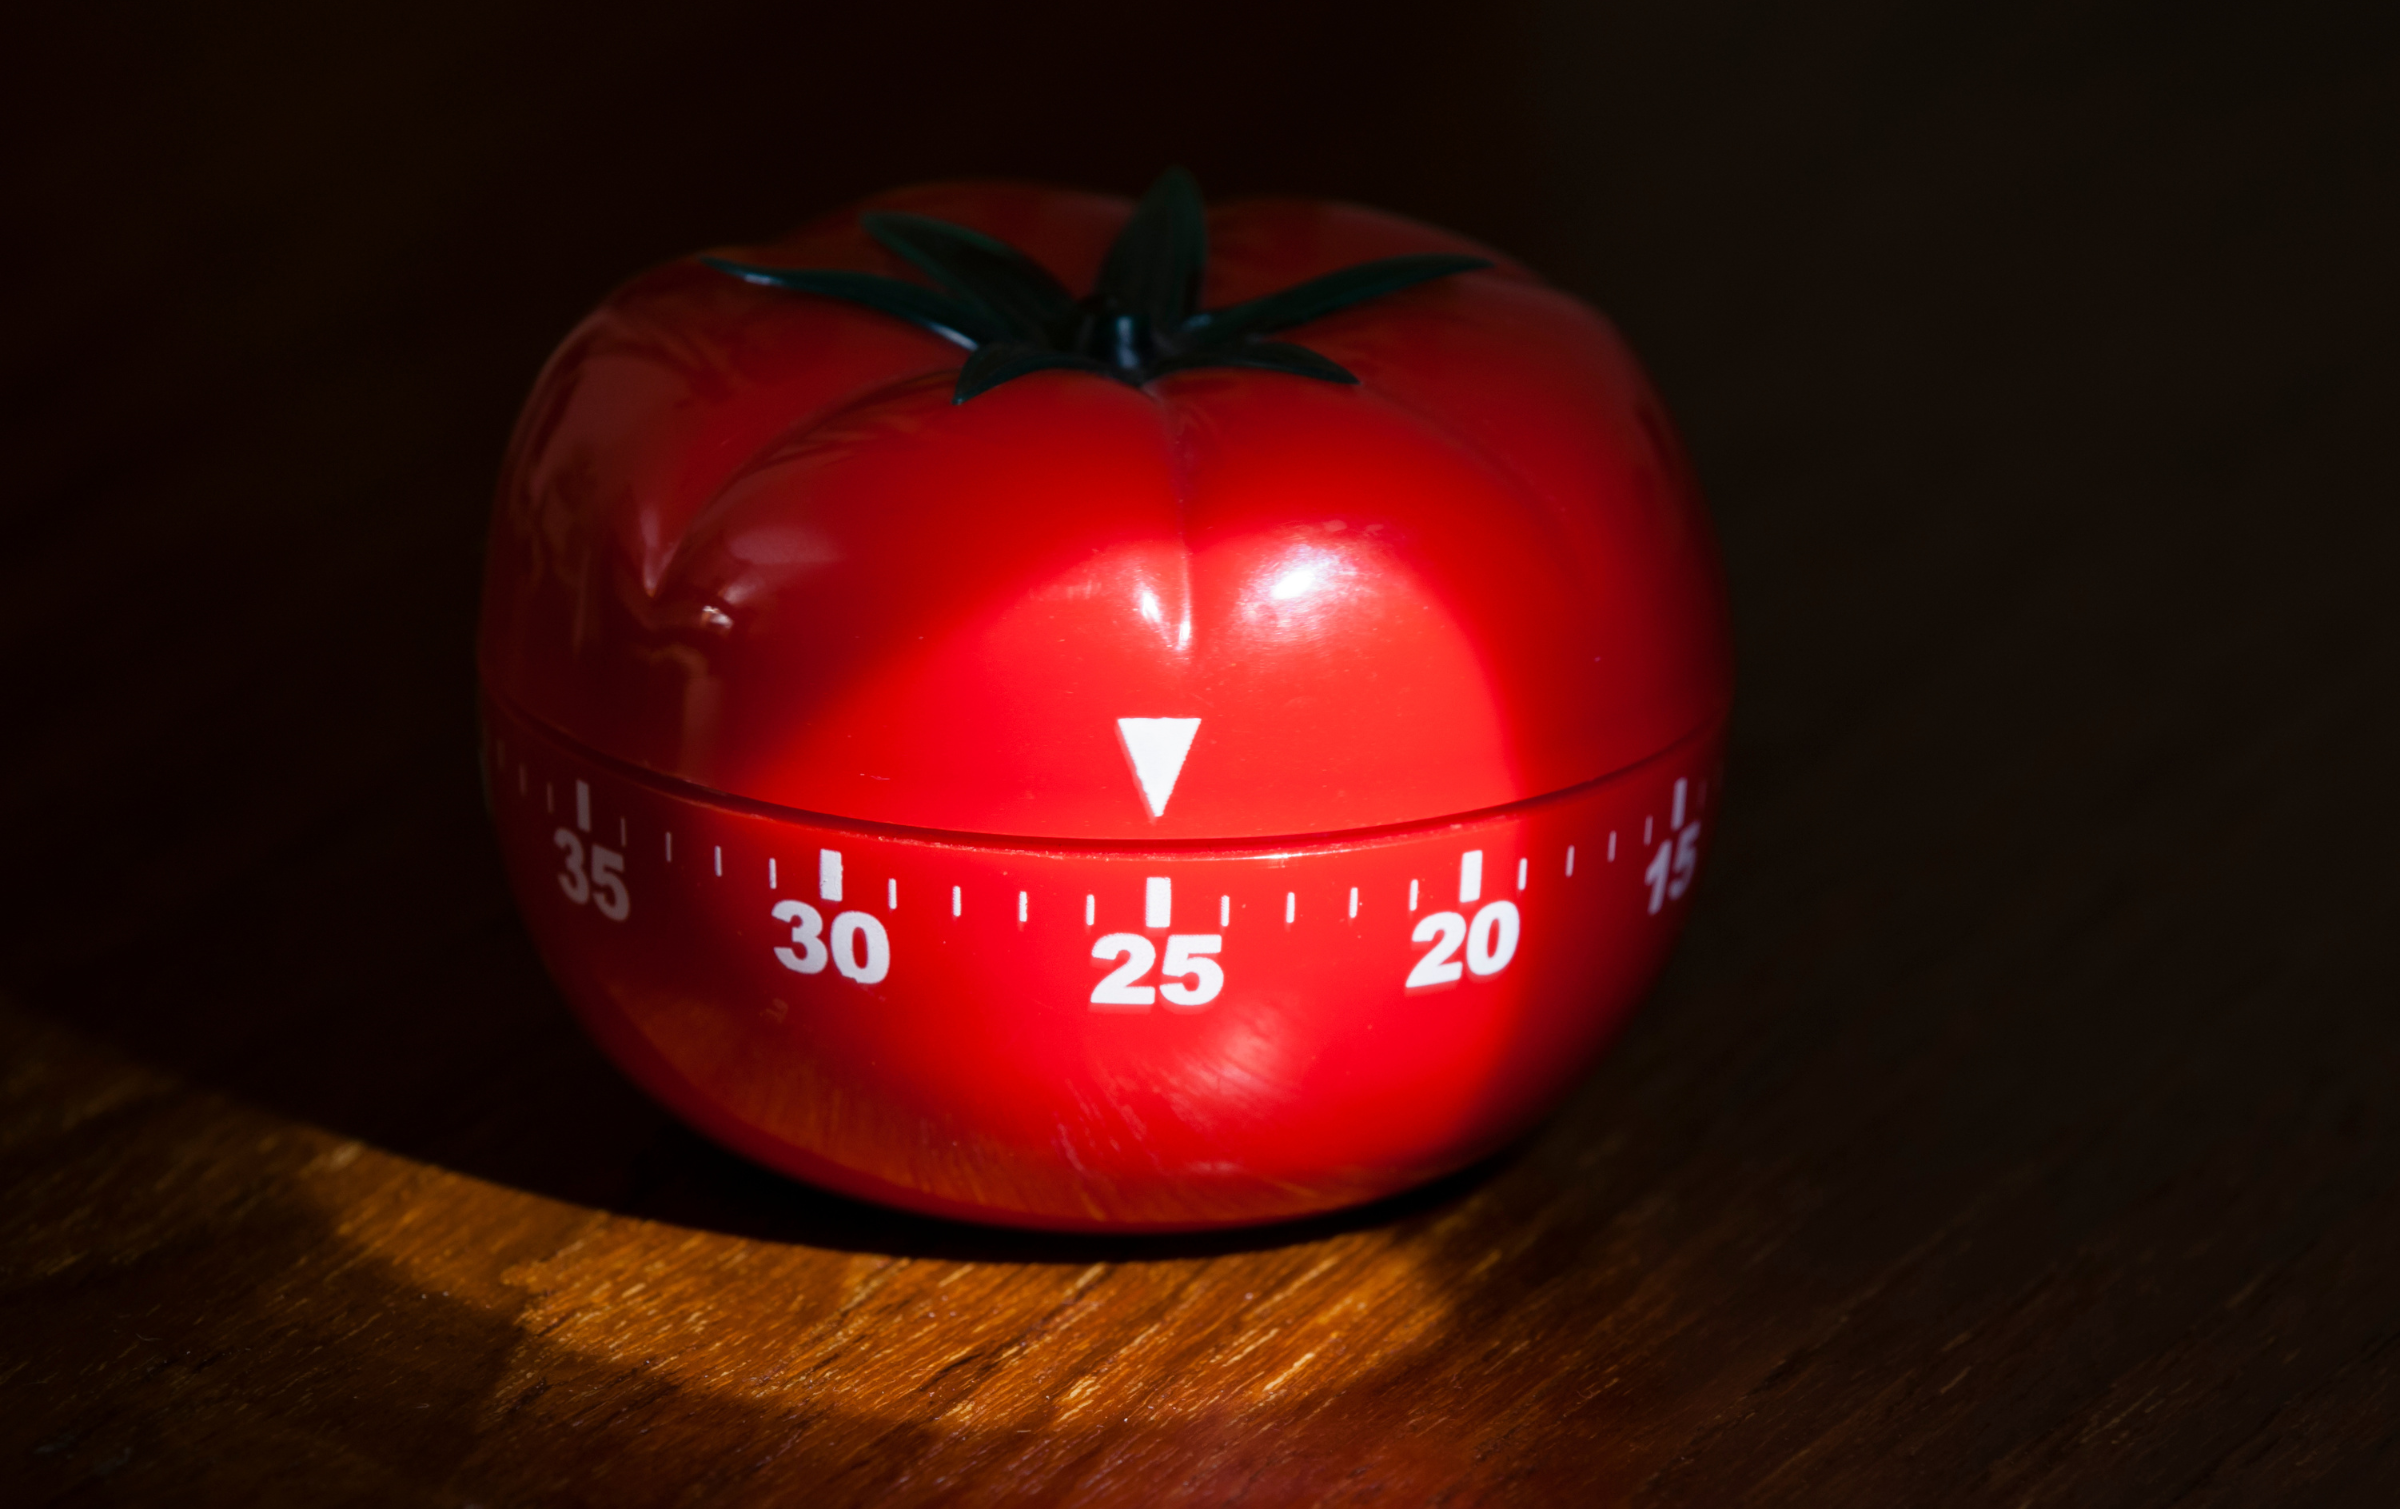 simple tomato shaped timer at 25 minutes